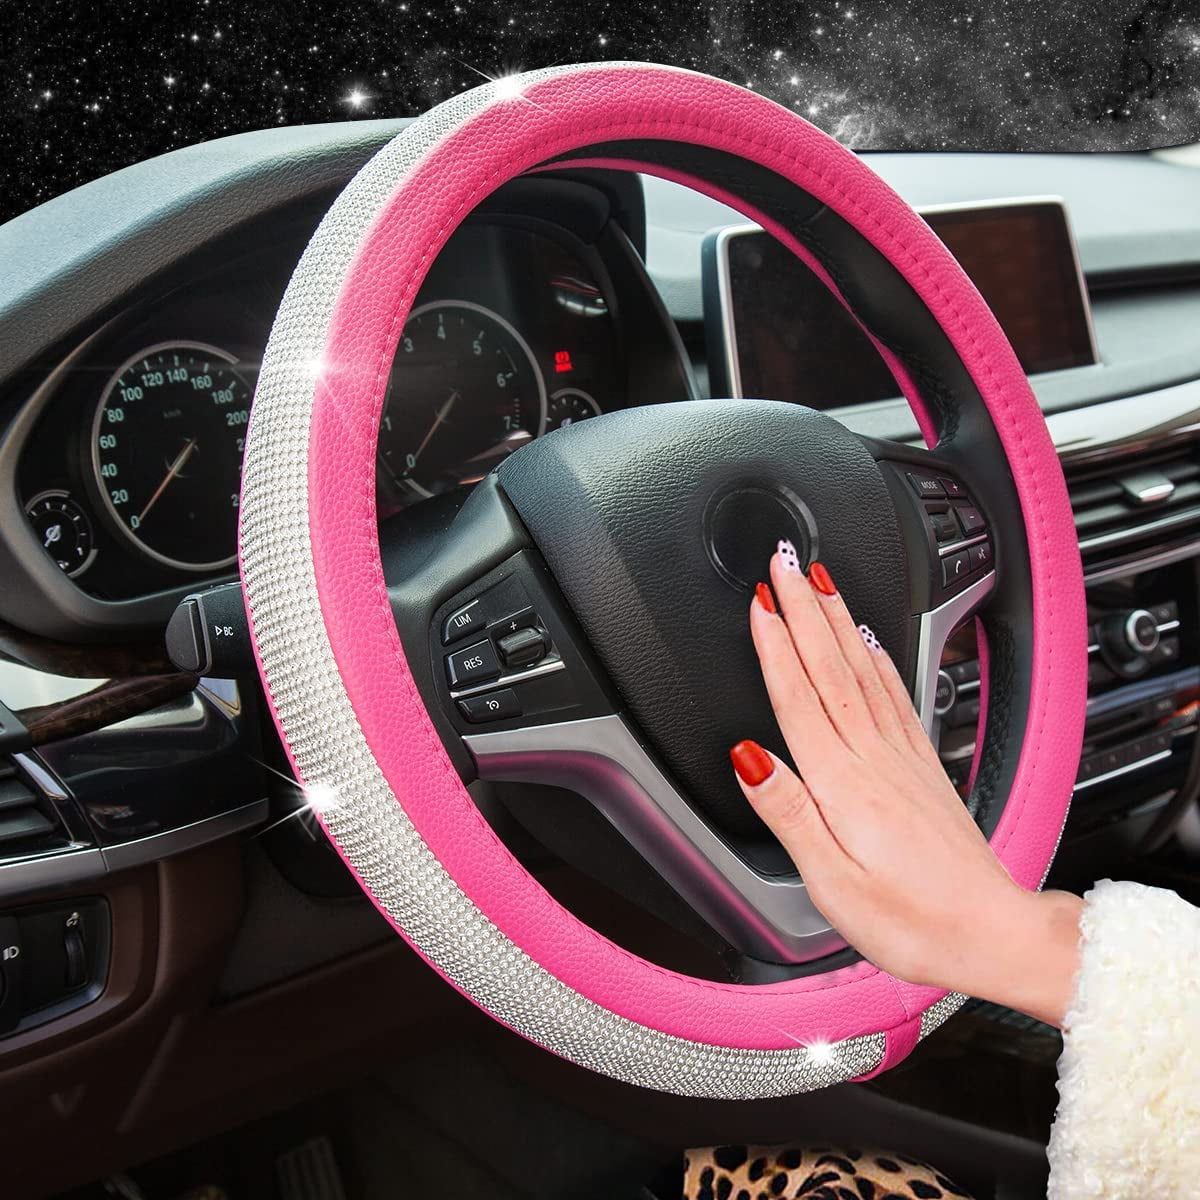 New Diamond Leather Steering Wheel Cover with Bling Bling Crystal  Rhinestones, Universal Fit 15 Inch Car Wheel Protector for Women Girls Pink  Diamond 